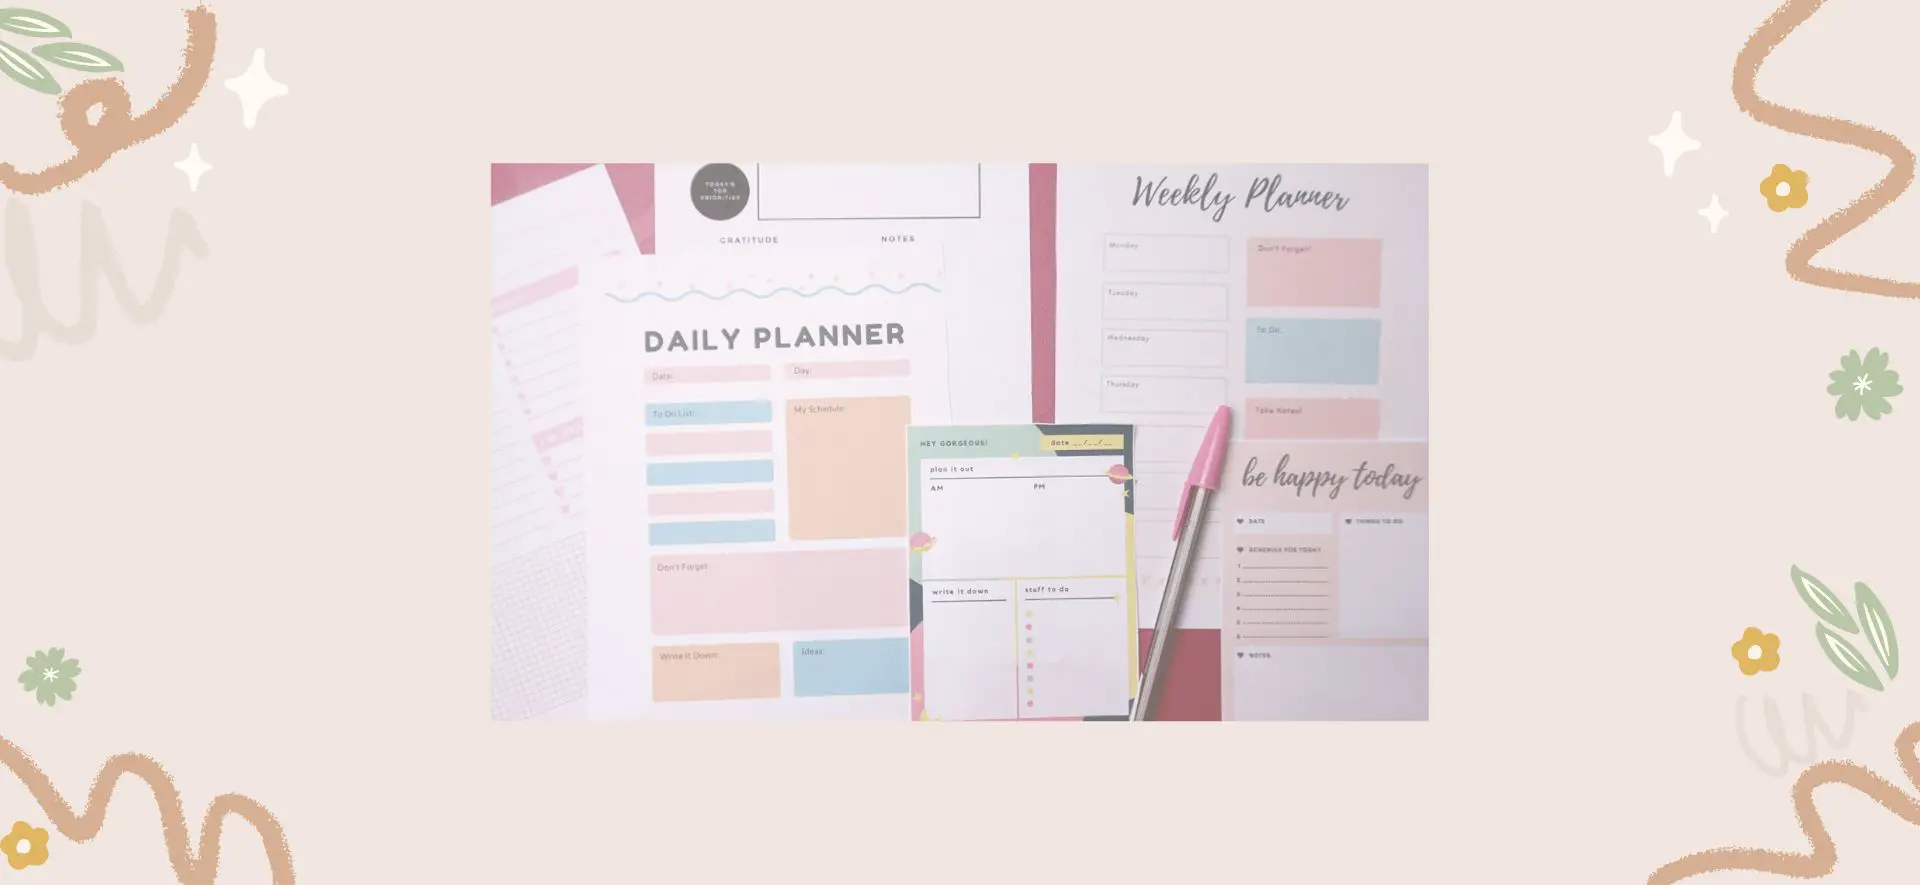 Free Printable Travel Planner And Journal Stickers! - Cute Freebies For You